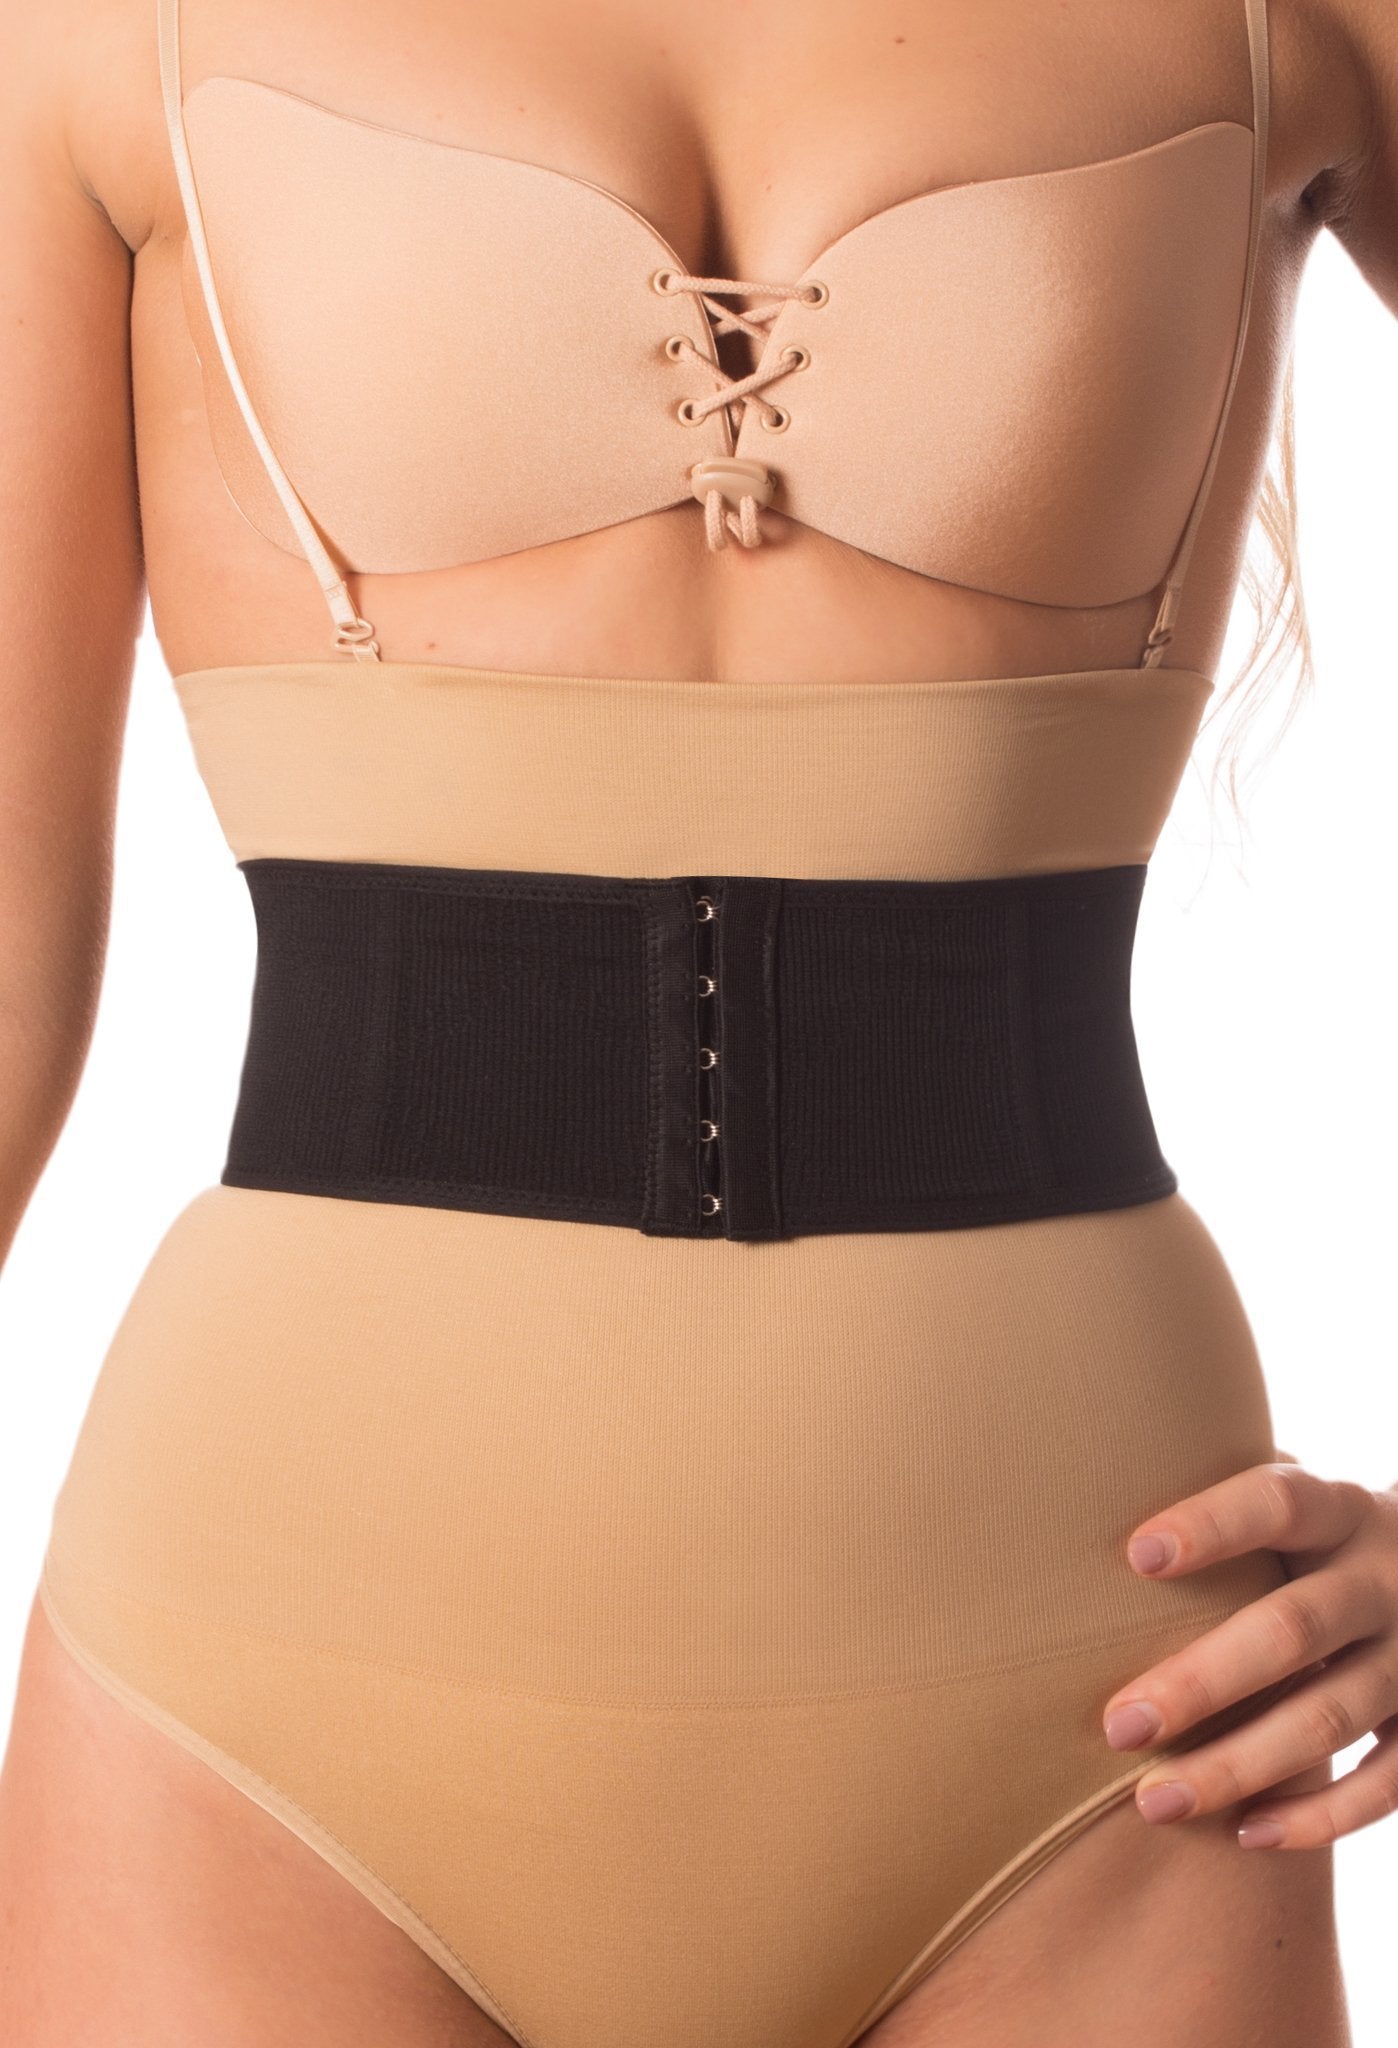 Wholesale Waist Cincher To Create Slim And Fit Looking Silhouettes